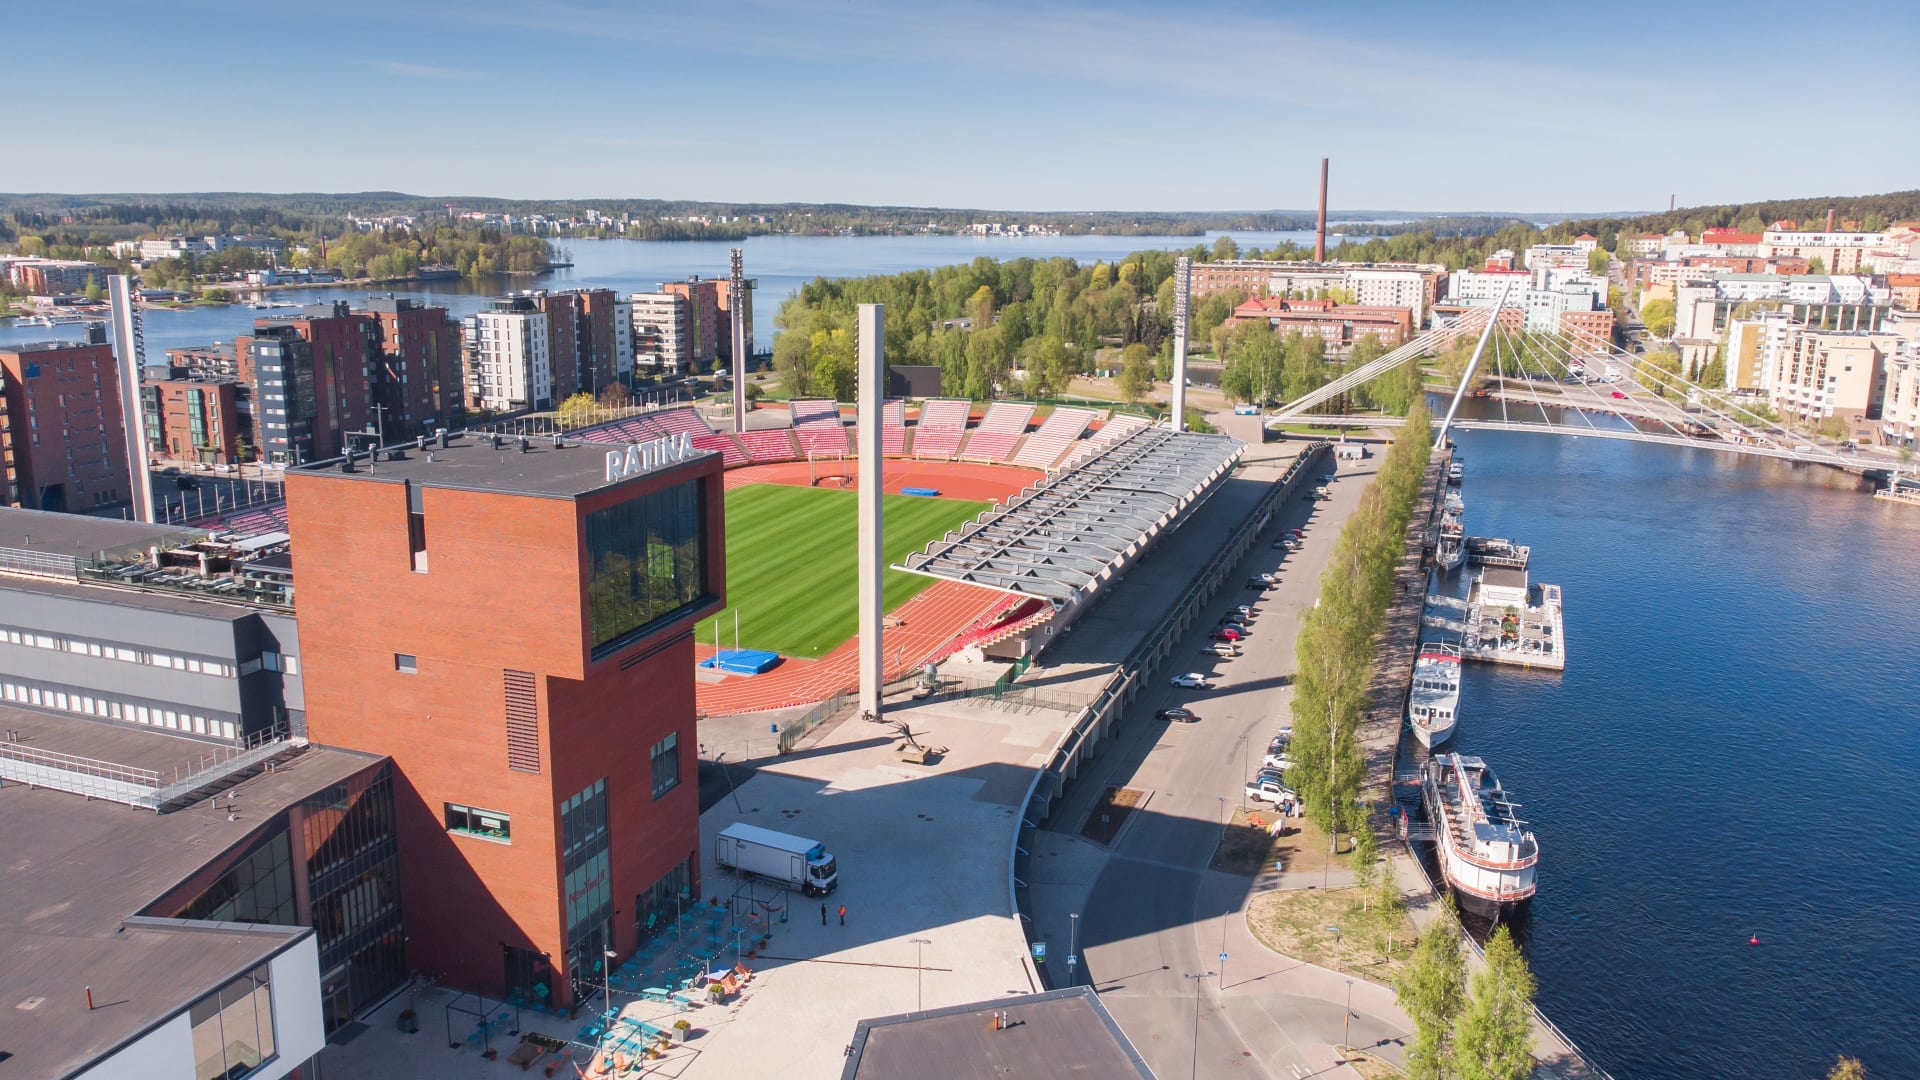 Ratina stadium and area from above